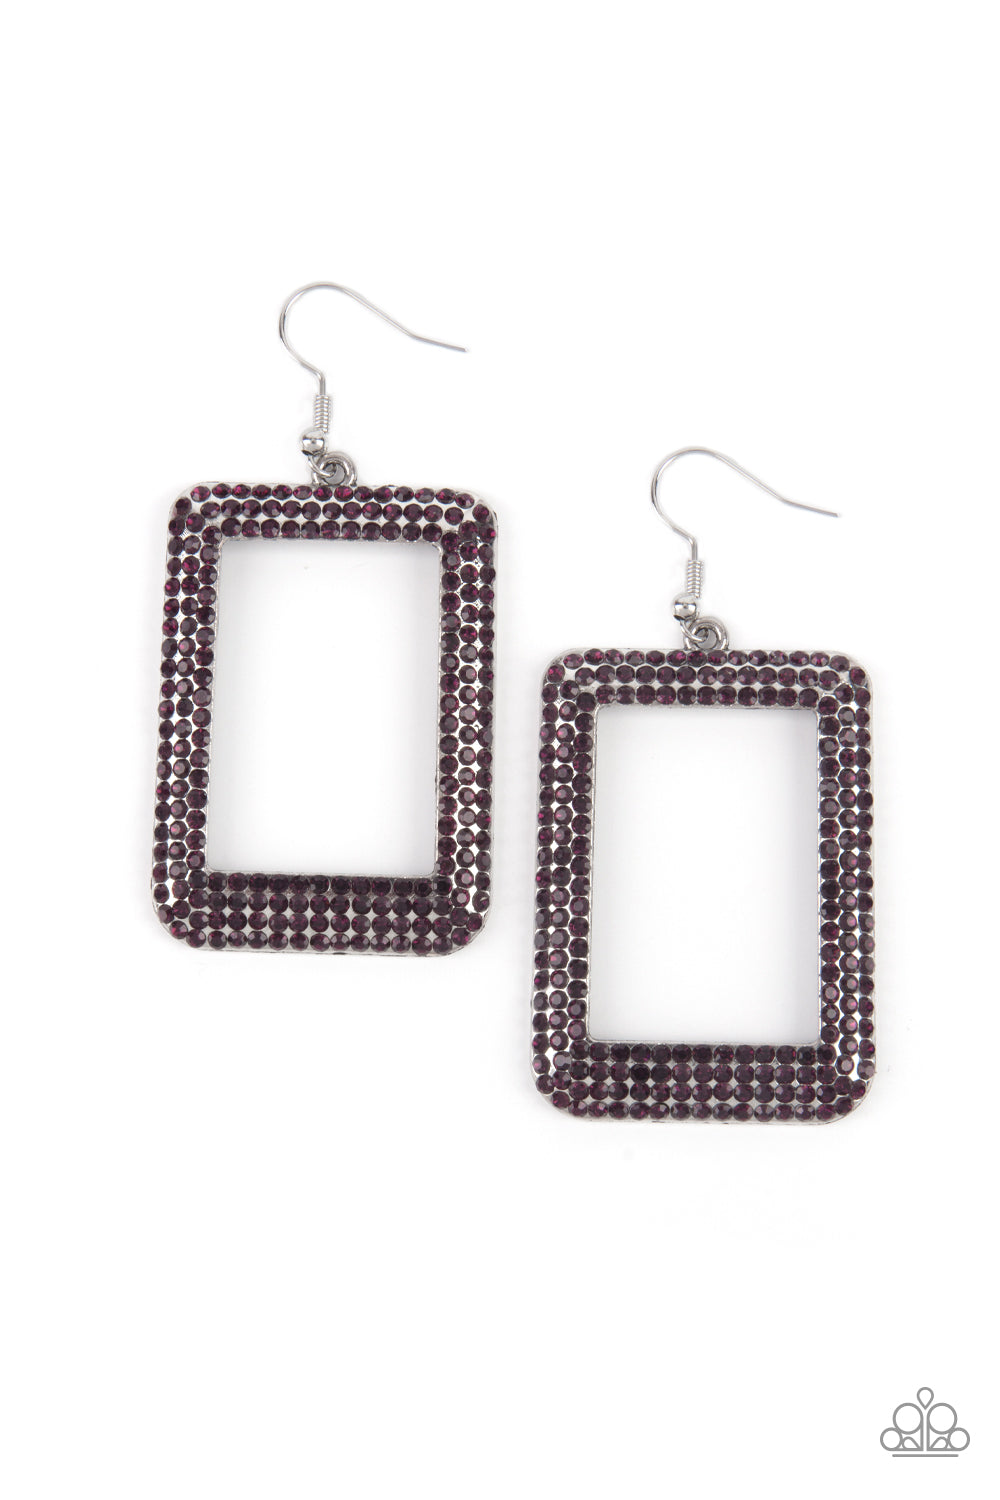 five-dollar-jewelry-world-frame-ous-purple-paparazzi-accessories